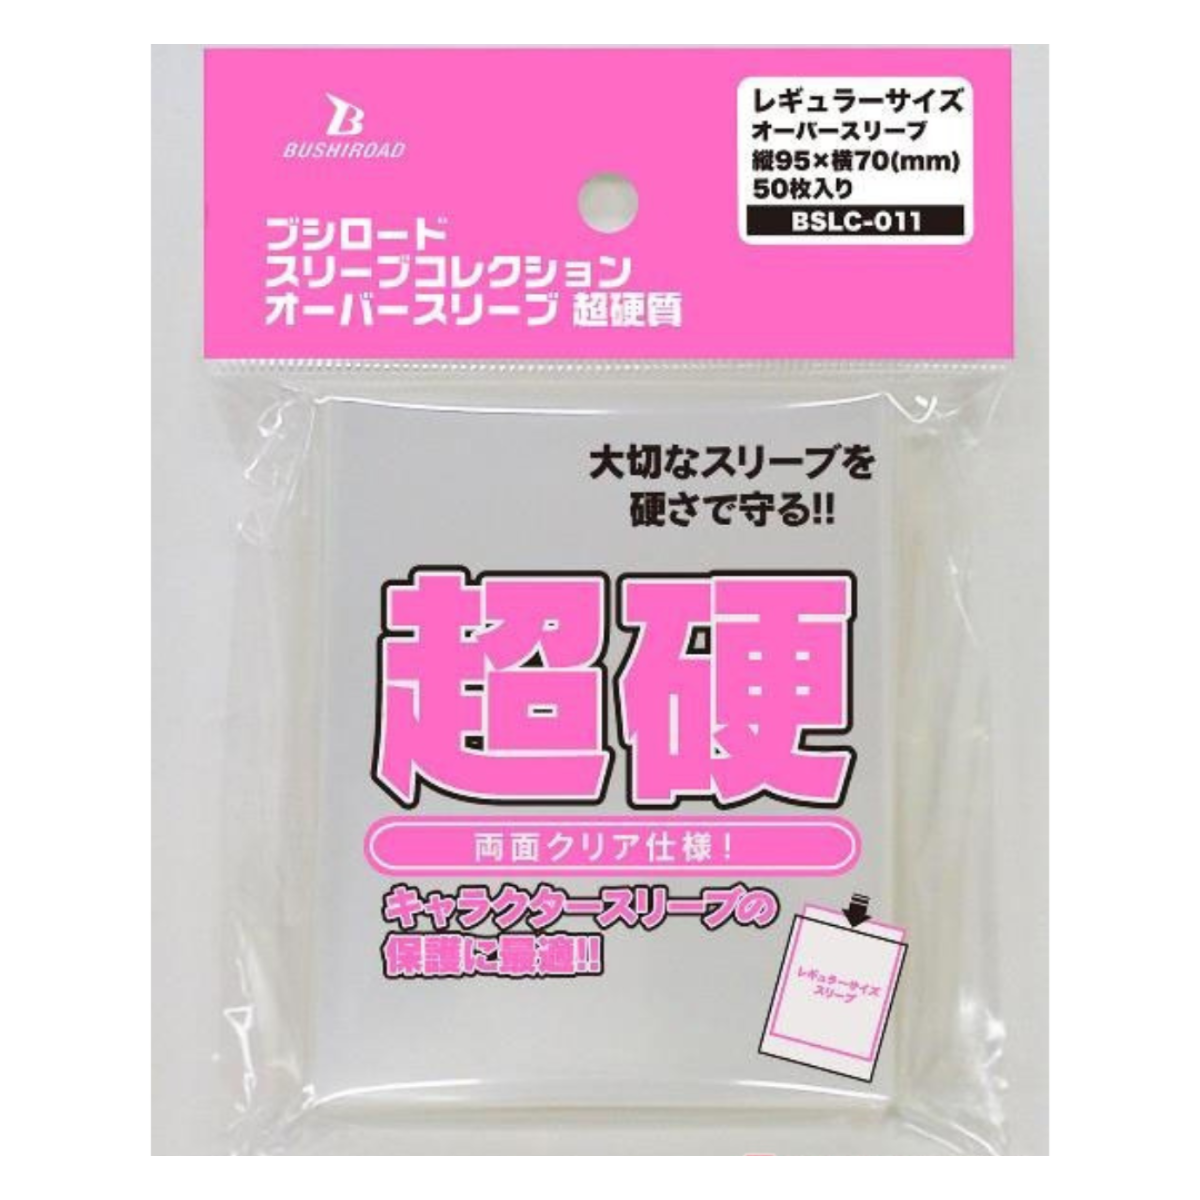 Bushiroad Sleeve Protector "Both Side Clear" Over Sleeve for Standard Size (Super Hard) [BSLC-011]-Bushiroad-Ace Cards & Collectibles